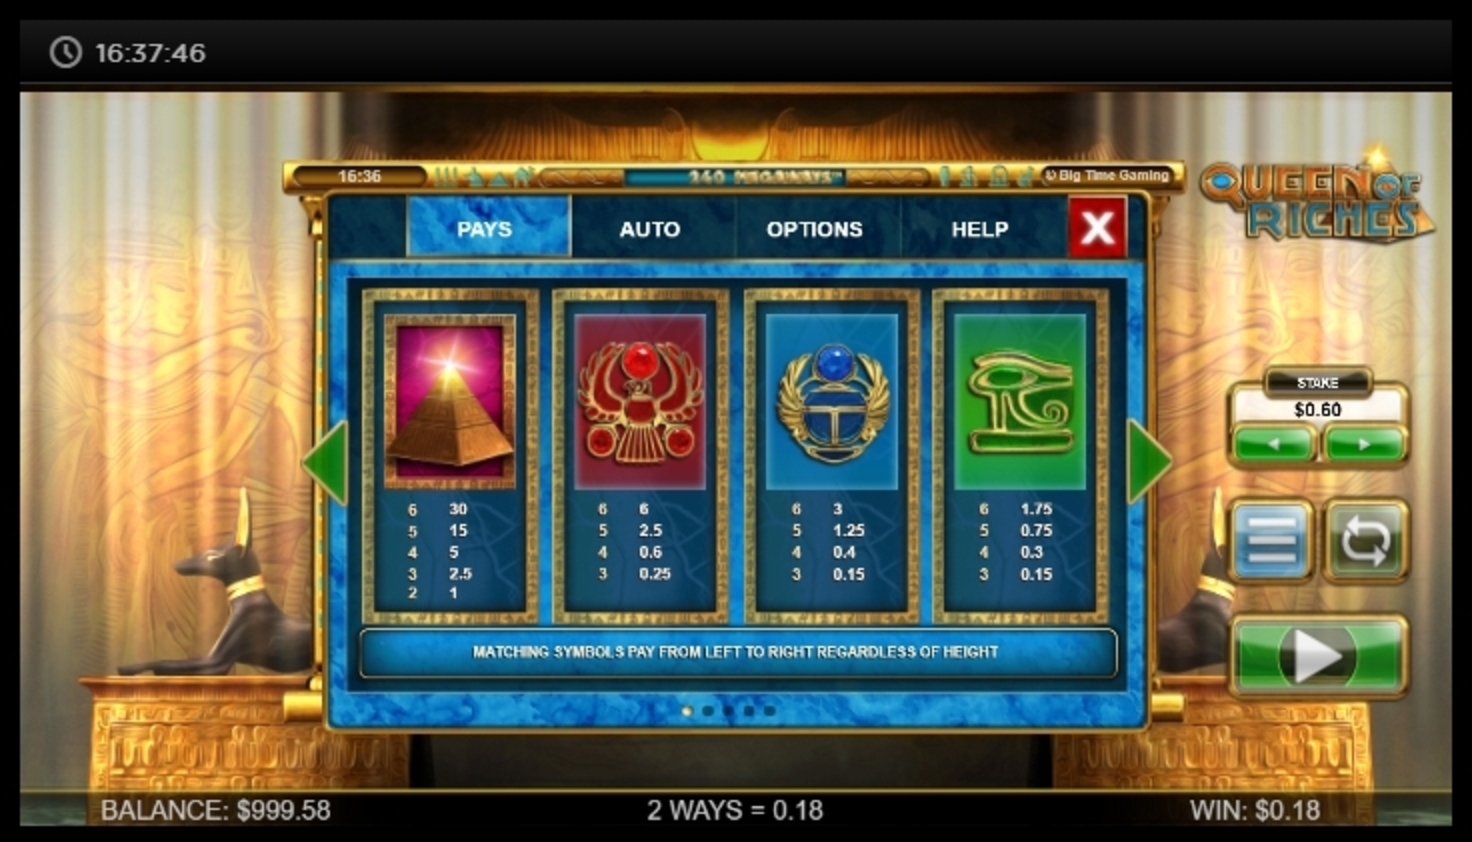 Info of Queen of Riches Slot Game by Big Time Gaming